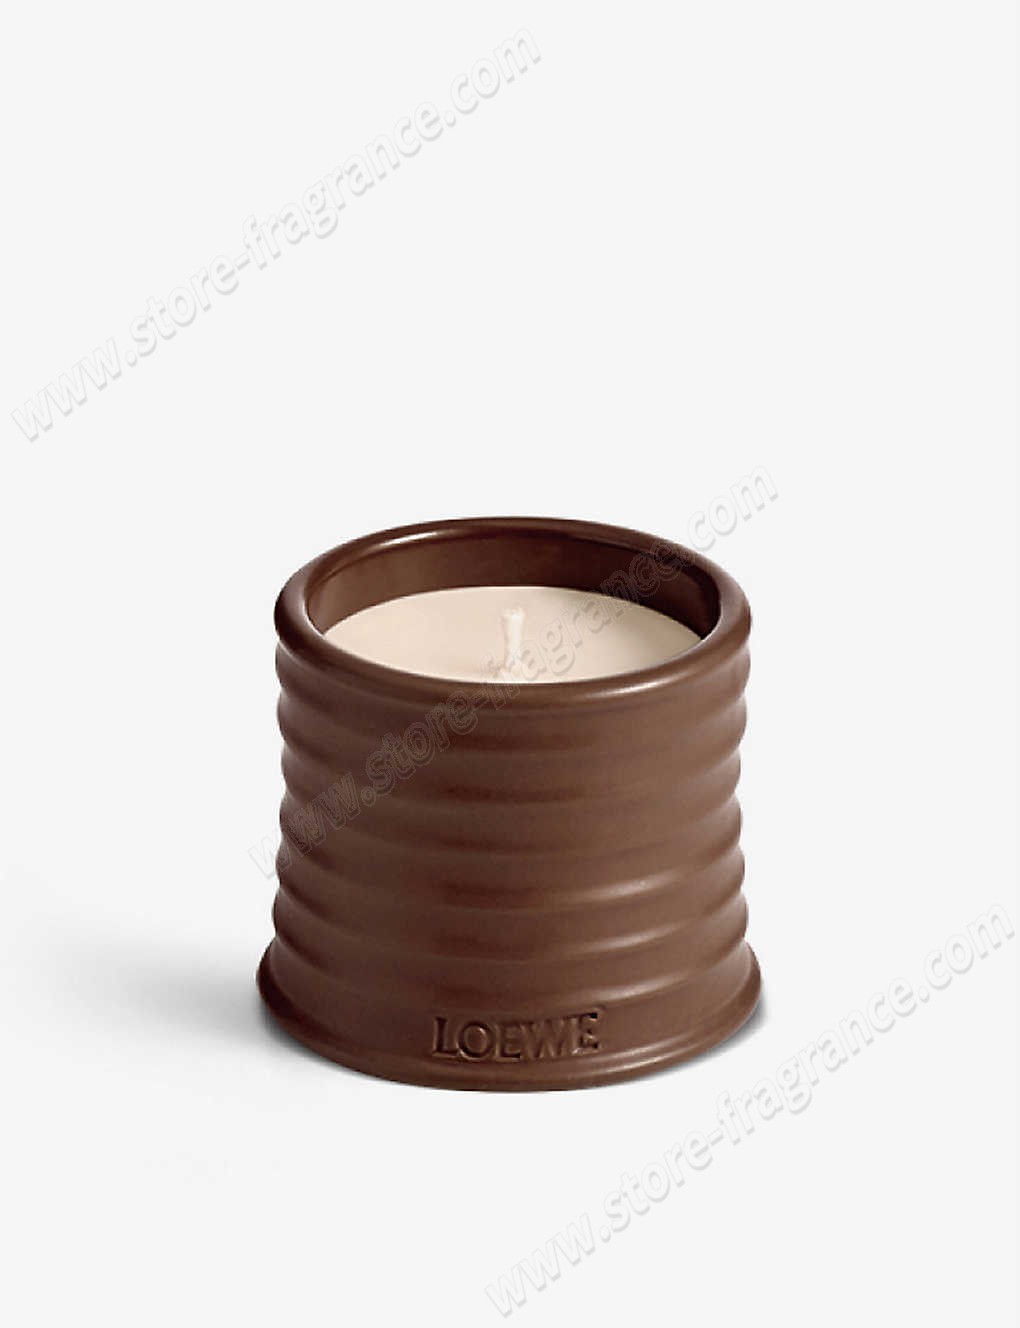 LOEWE/Coriander scented candle 170g ✿ Discount Store - -0